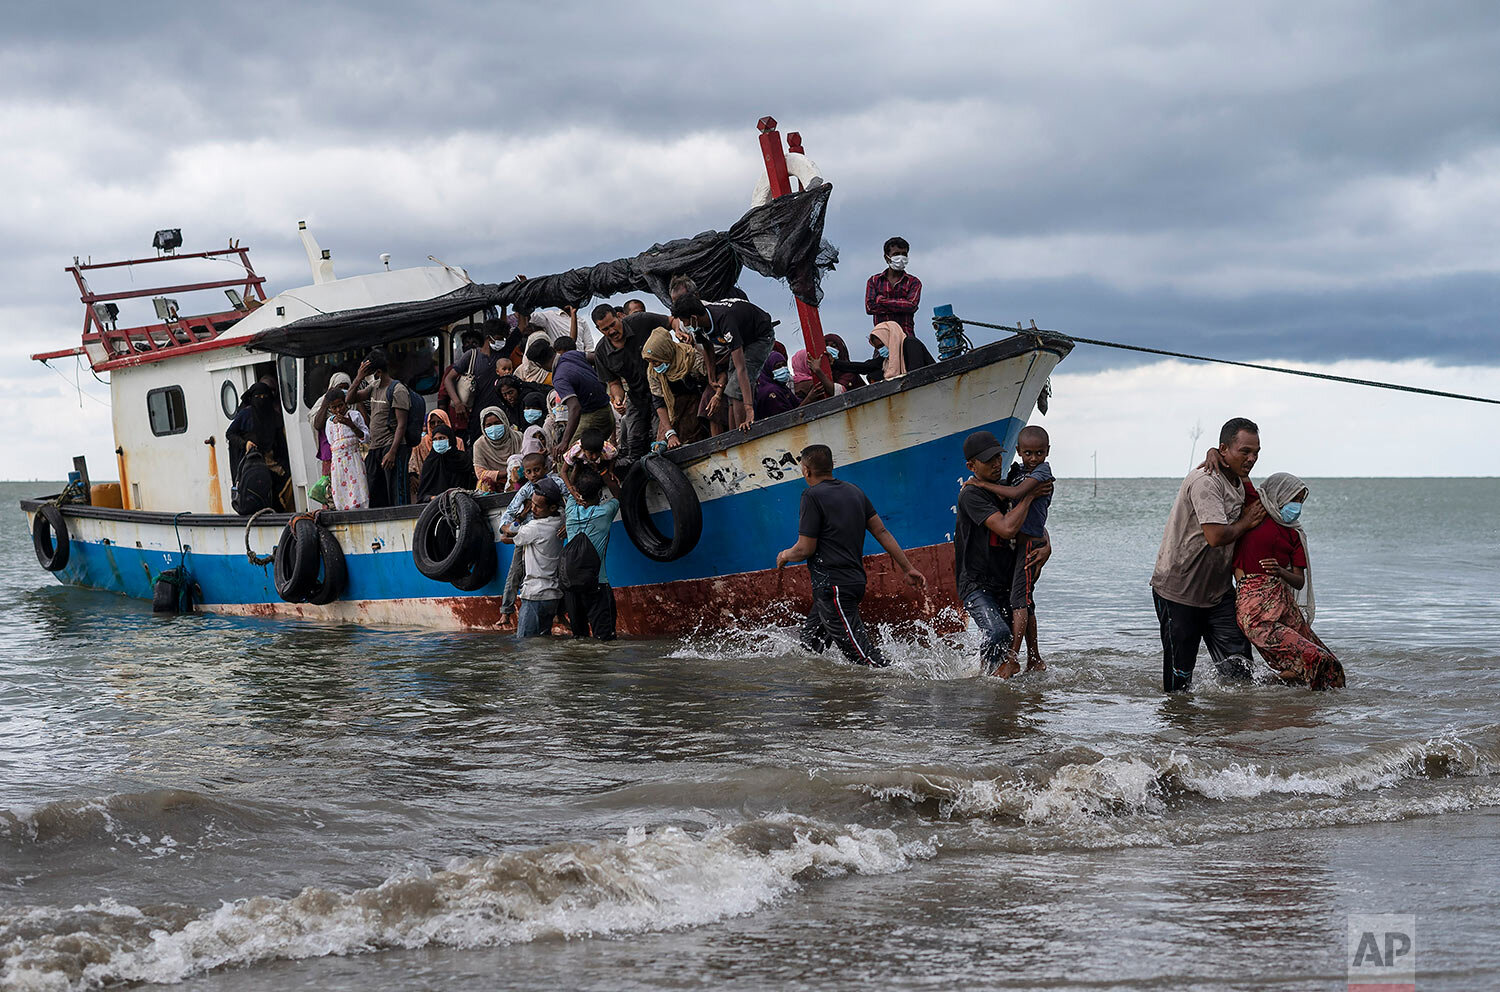  Local fisherman help ethnic-Rohingya people as they arrive on Lancok Beach, North Aceh, Indonesia, Thursday, June 25, 2020. (AP Photo/Zik Maulana) 